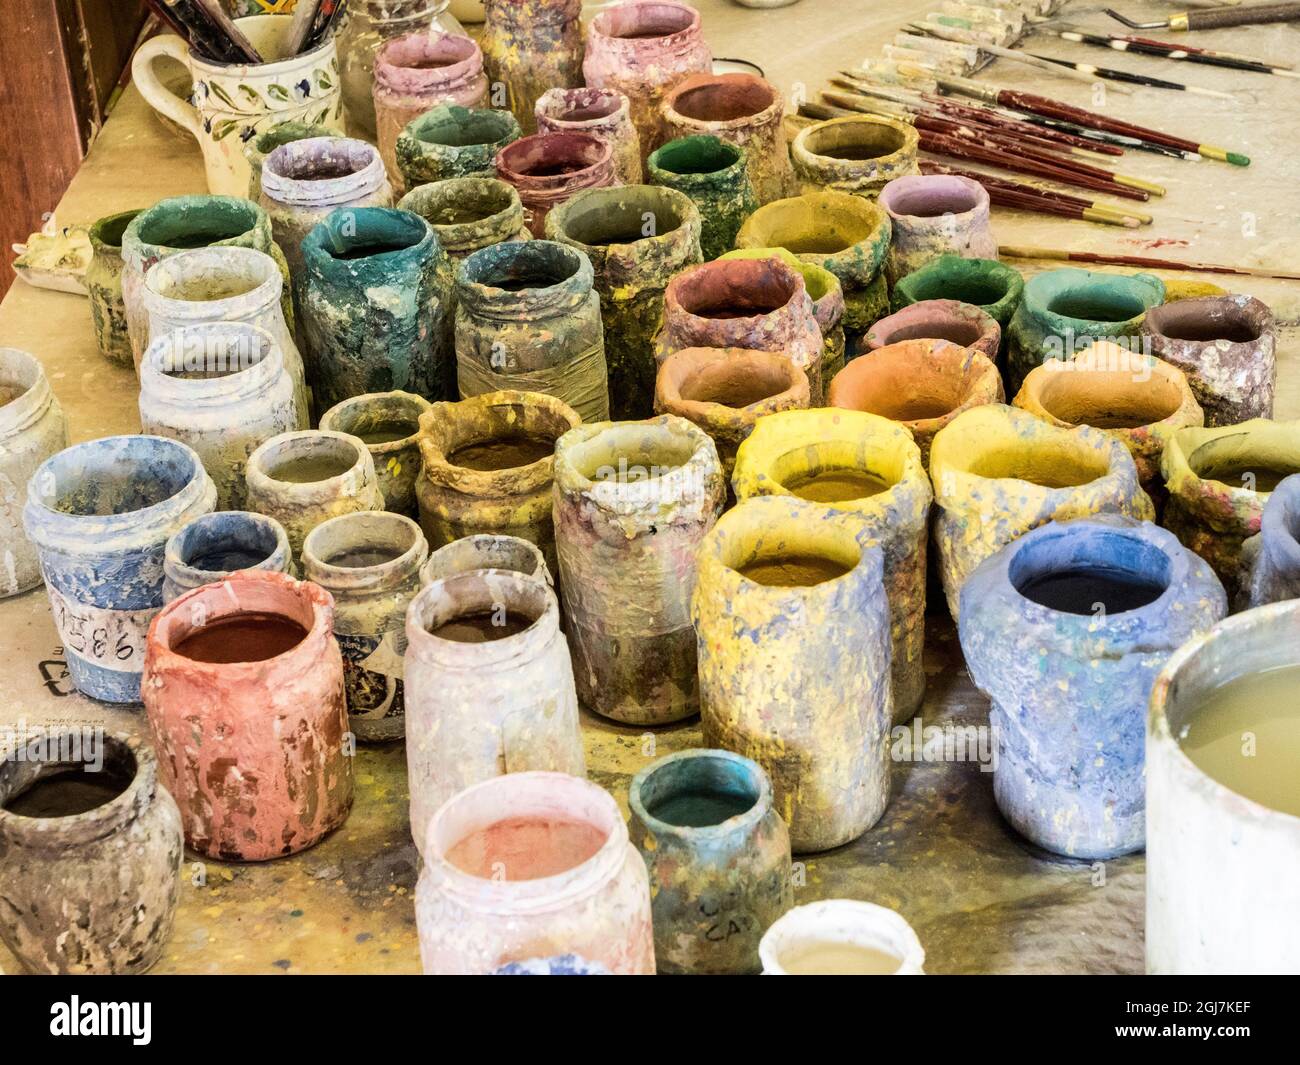 Europe, Italy, Chianti. Jars of different paint colors in a